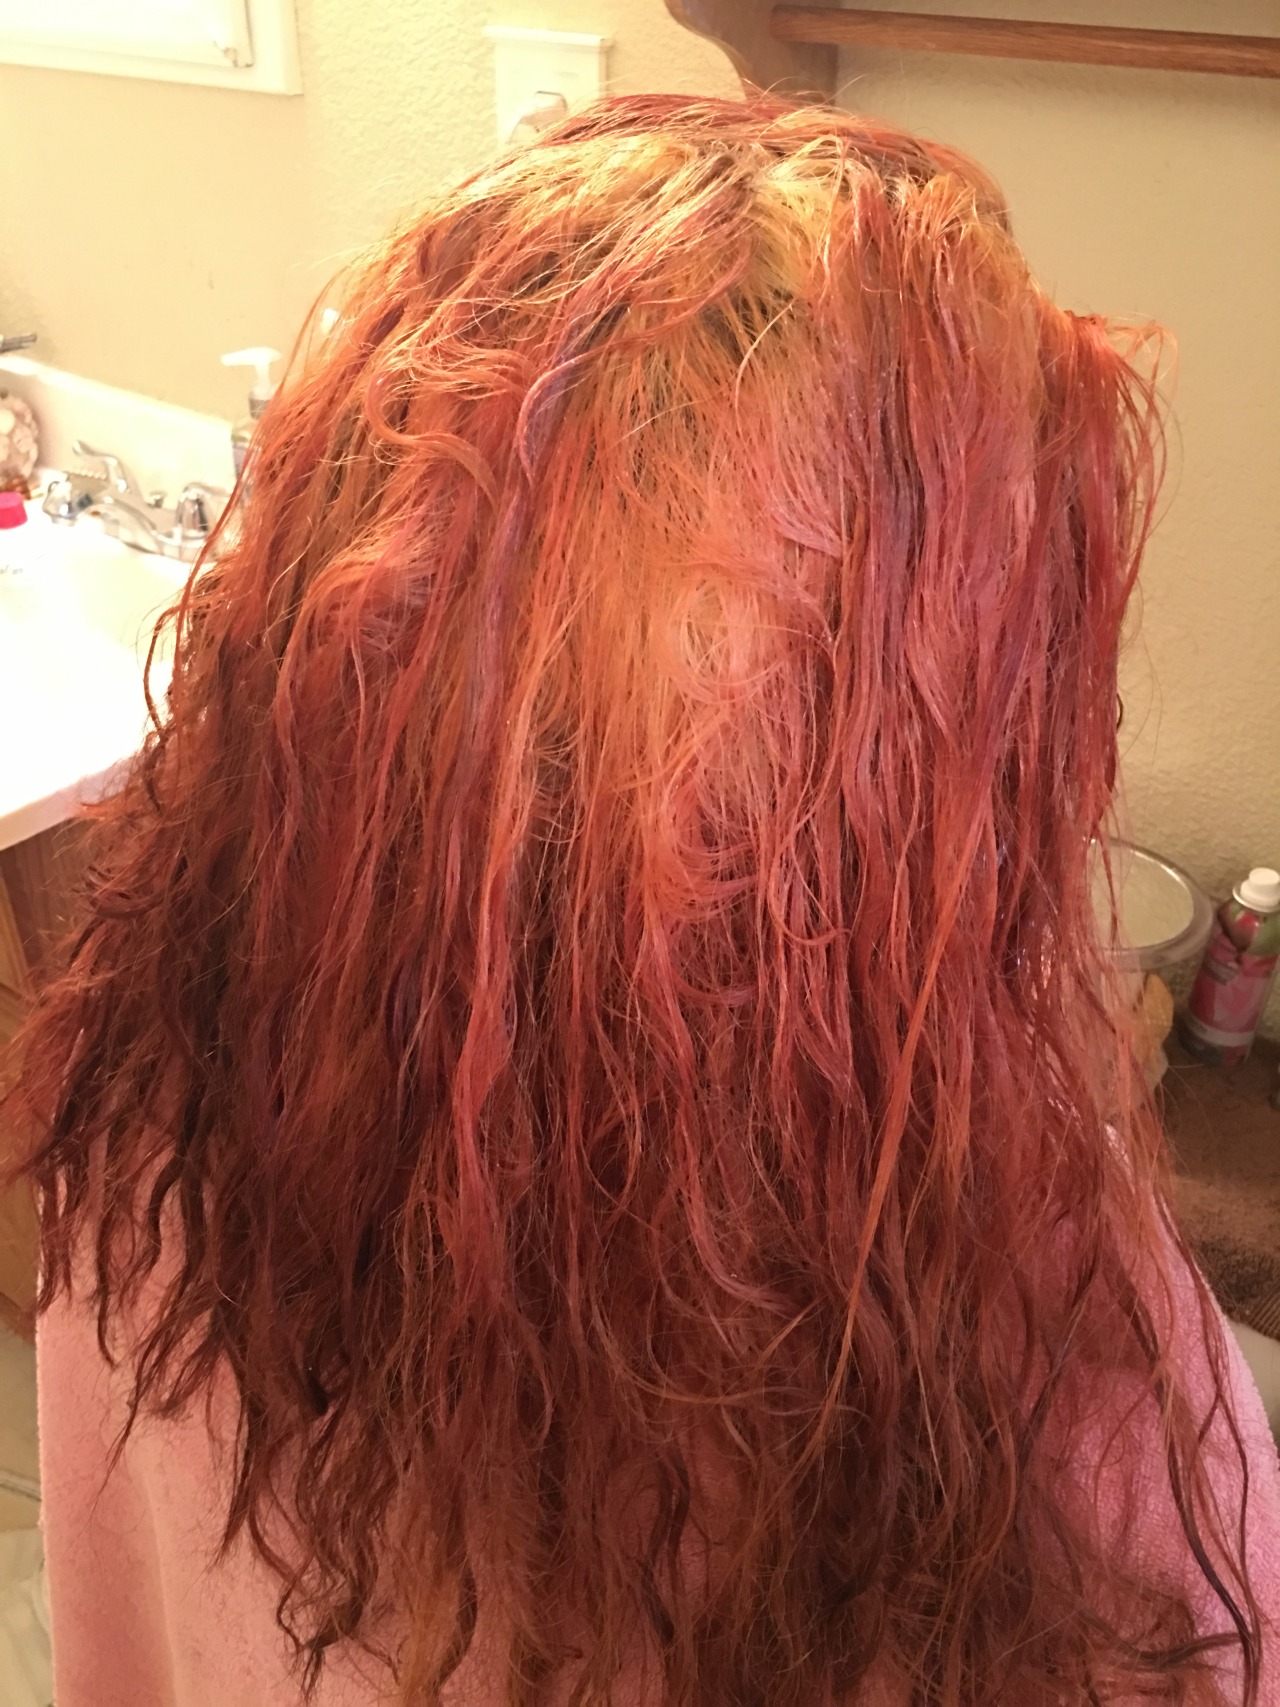 My hair obsession - Besides a failed L'oreal Hicolor experiment,...